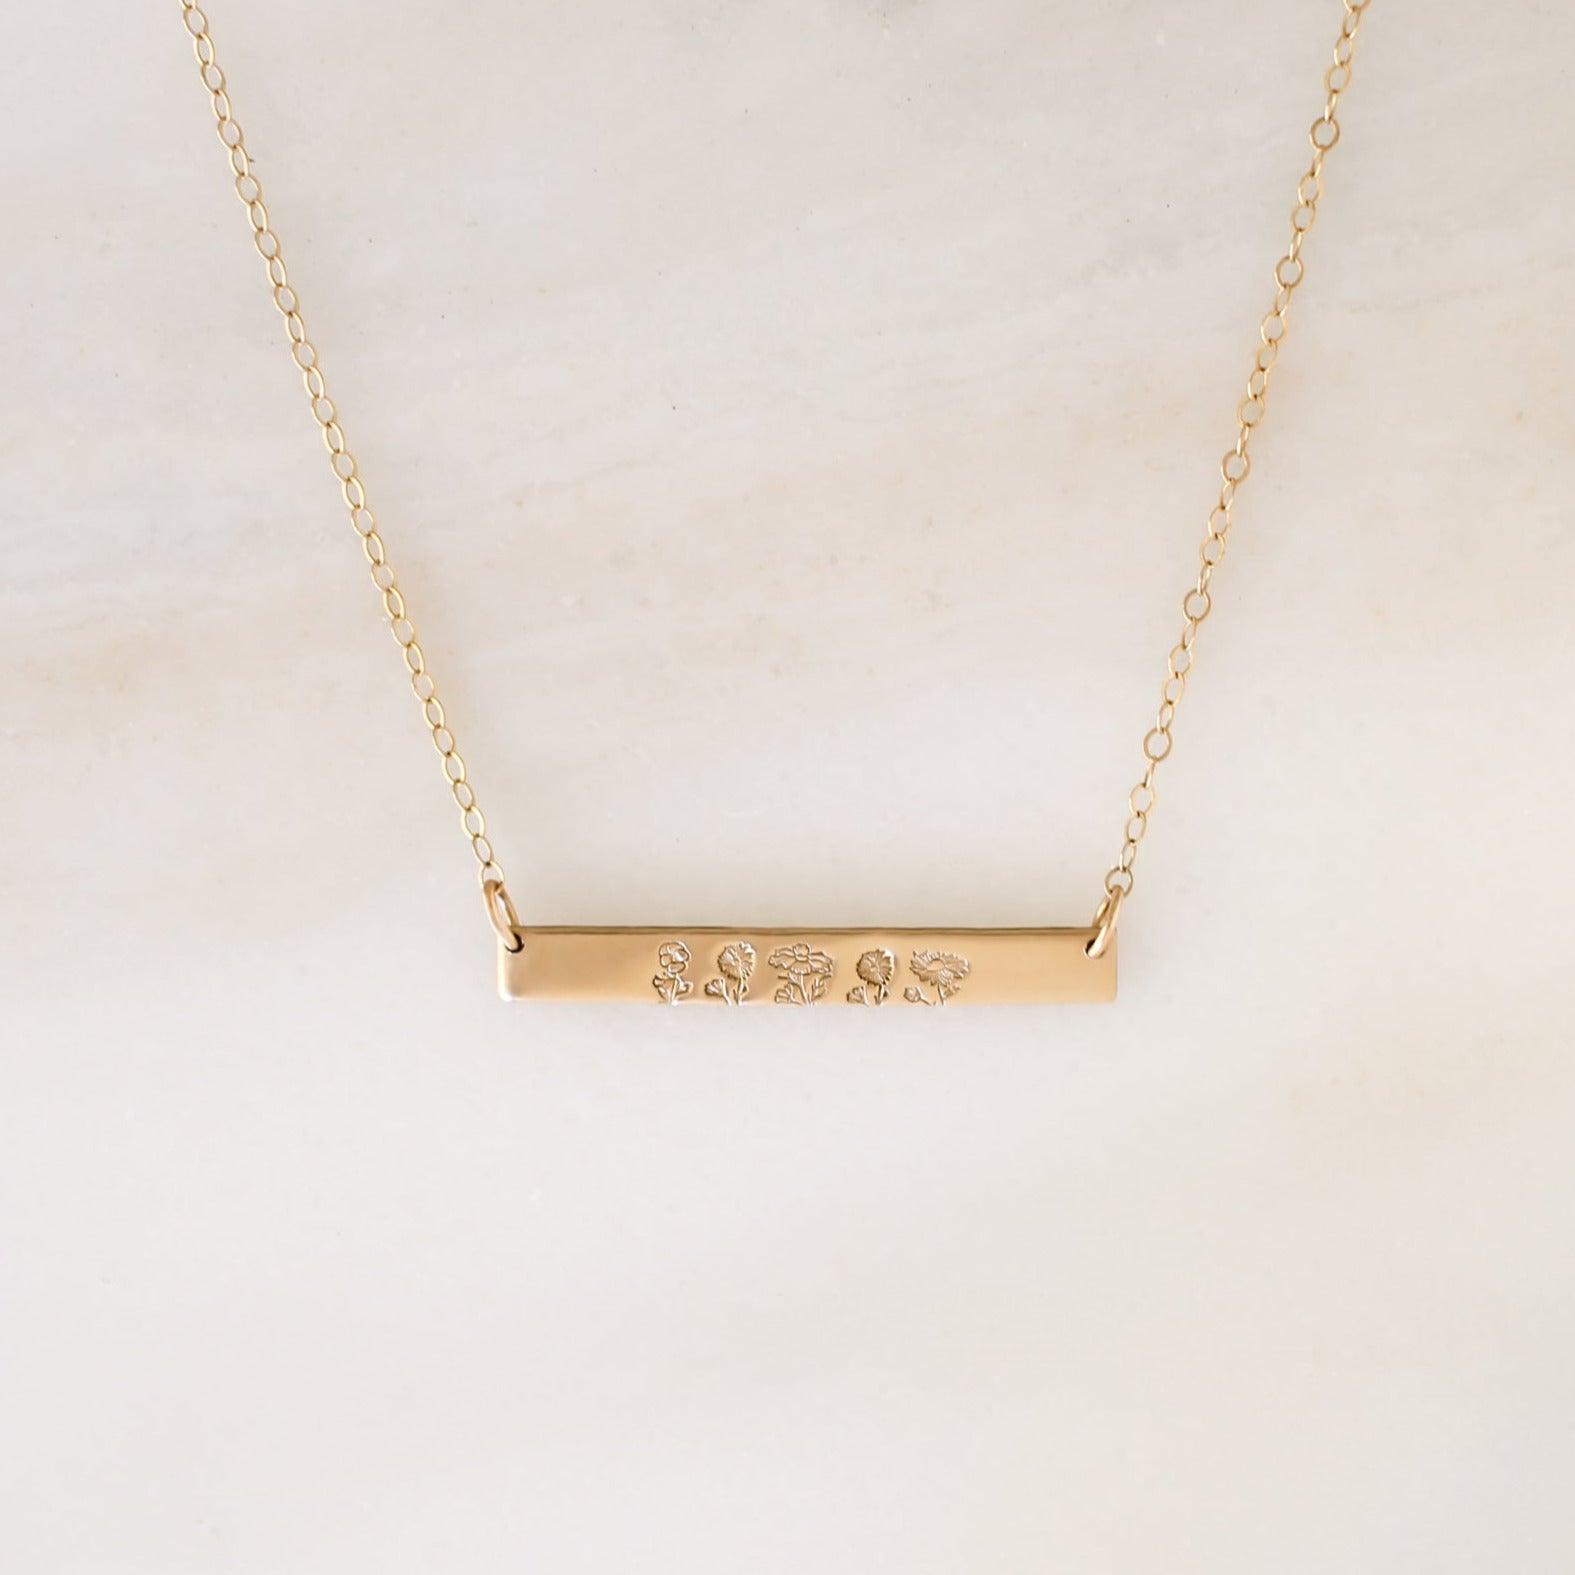 Family Garden Bar Necklace - Nolia Jewelry - Meaningful + Sustainably Handcrafted Jewelry